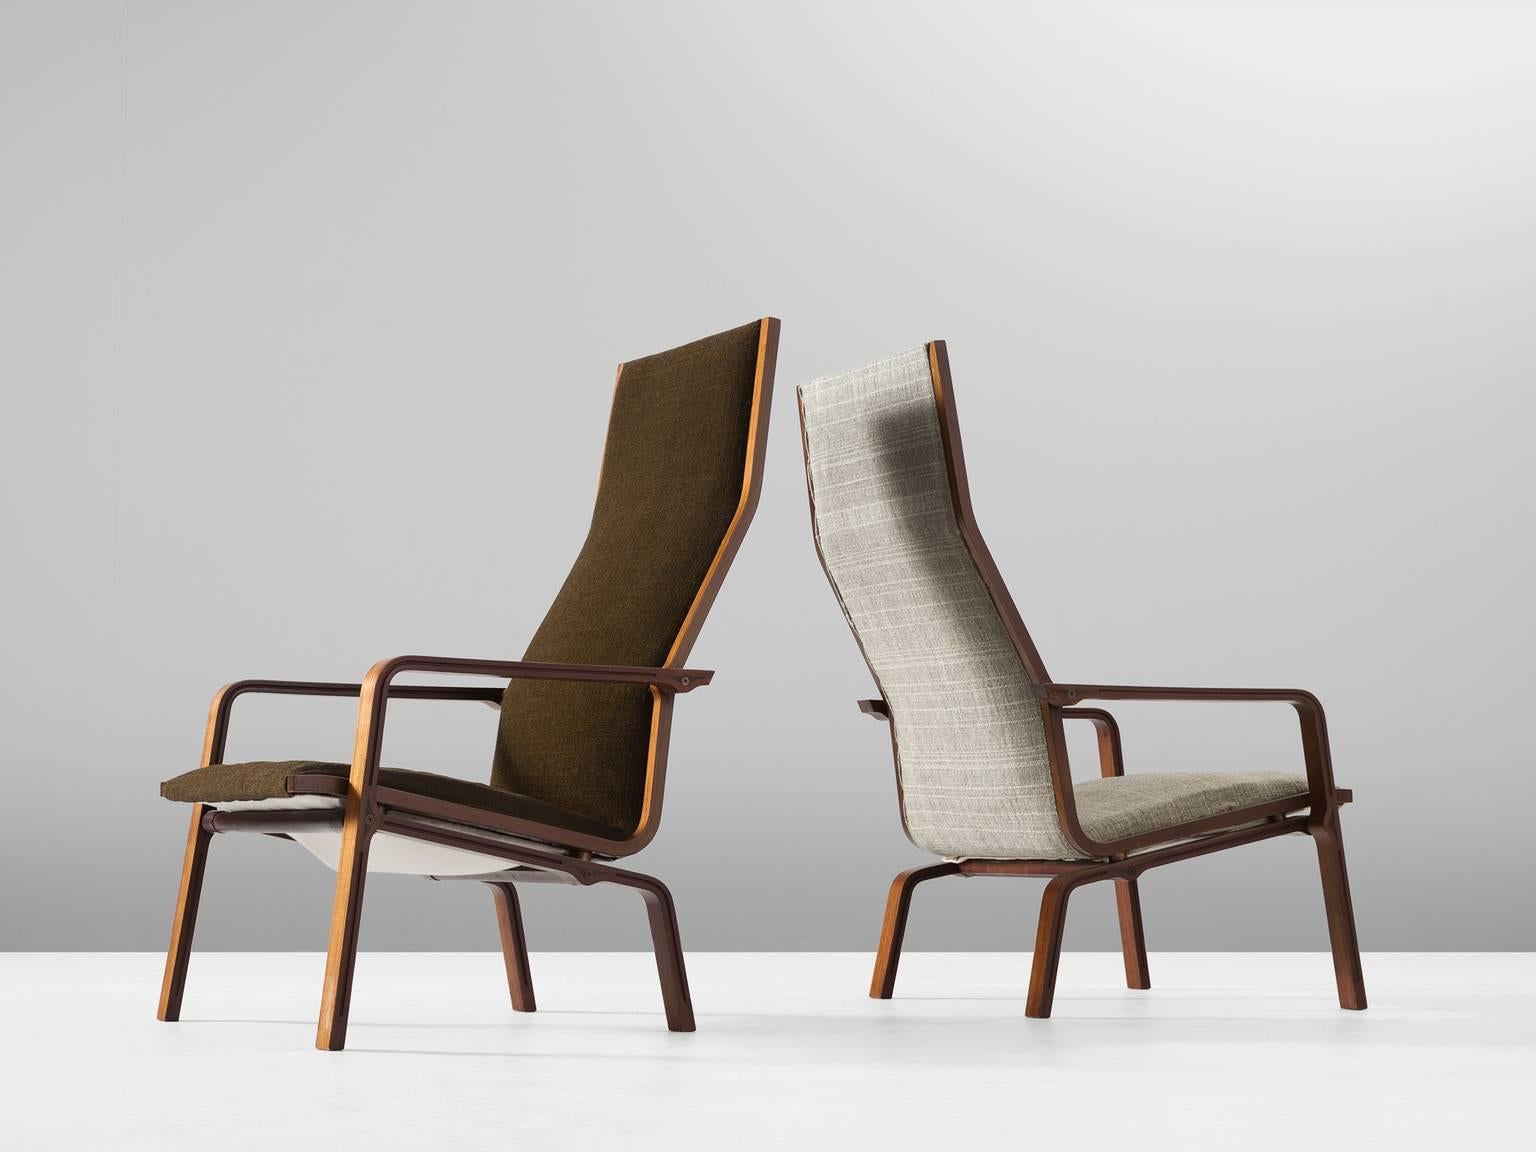 Set of two St. Catherine chairs model 4335, in rosewood and fabric by Arne Jacobsen for Fritz Hansen, Denmark, 1962.

Pair of high back chairs by Danish designer Arne Jacobsen. Were Jacobsen is known for his organic designs, these easy chairs show a